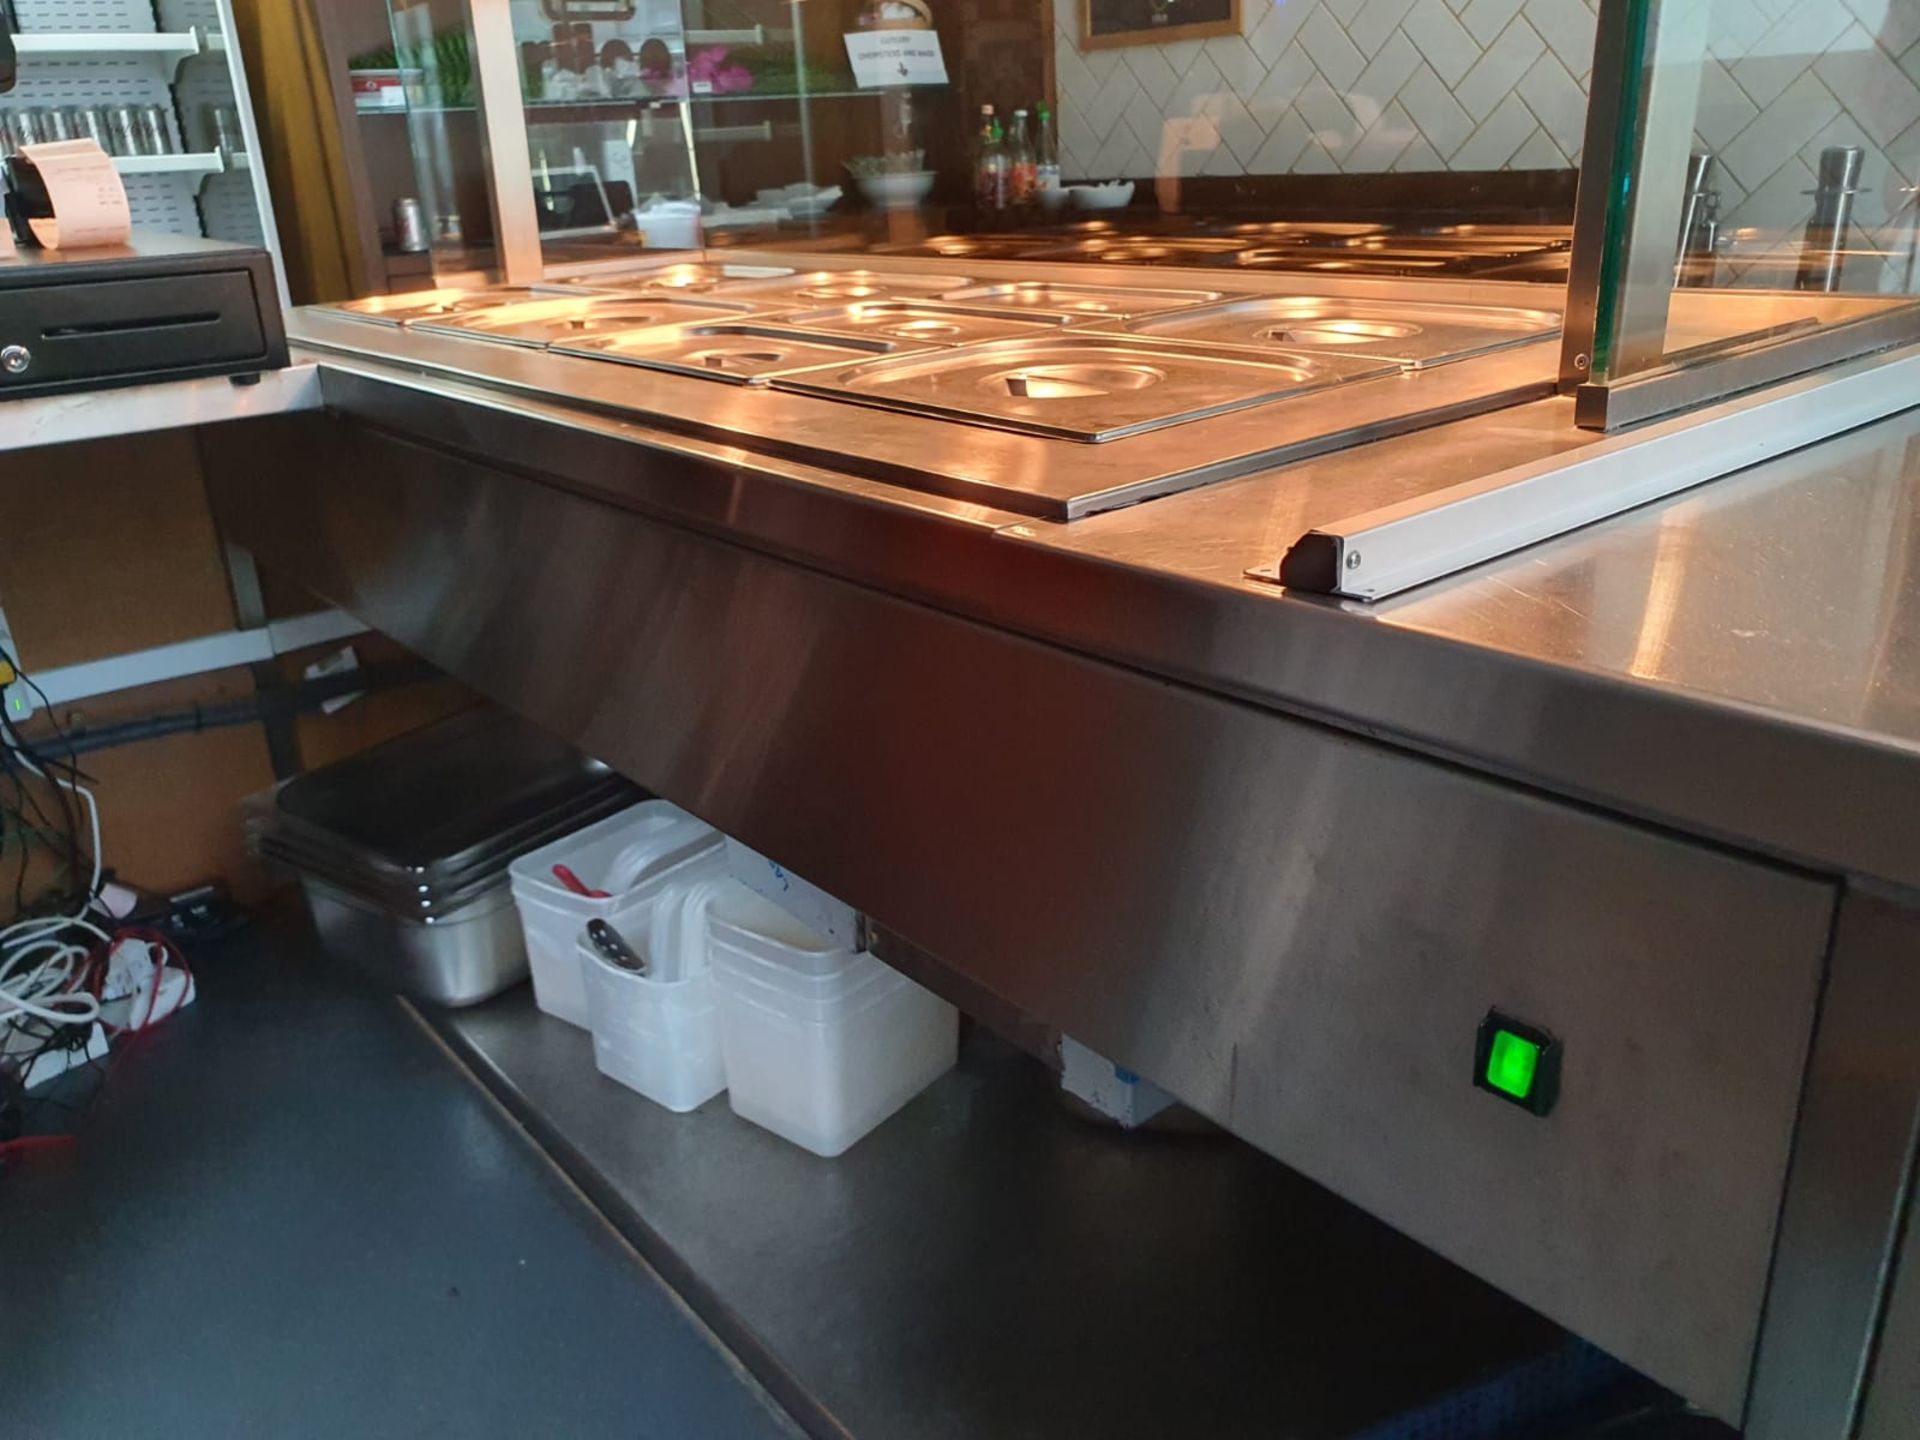 1 x Contemporary Restaurant Service Counter With Walnut Finish, Two Diamond Bain Marie Food - Image 9 of 25